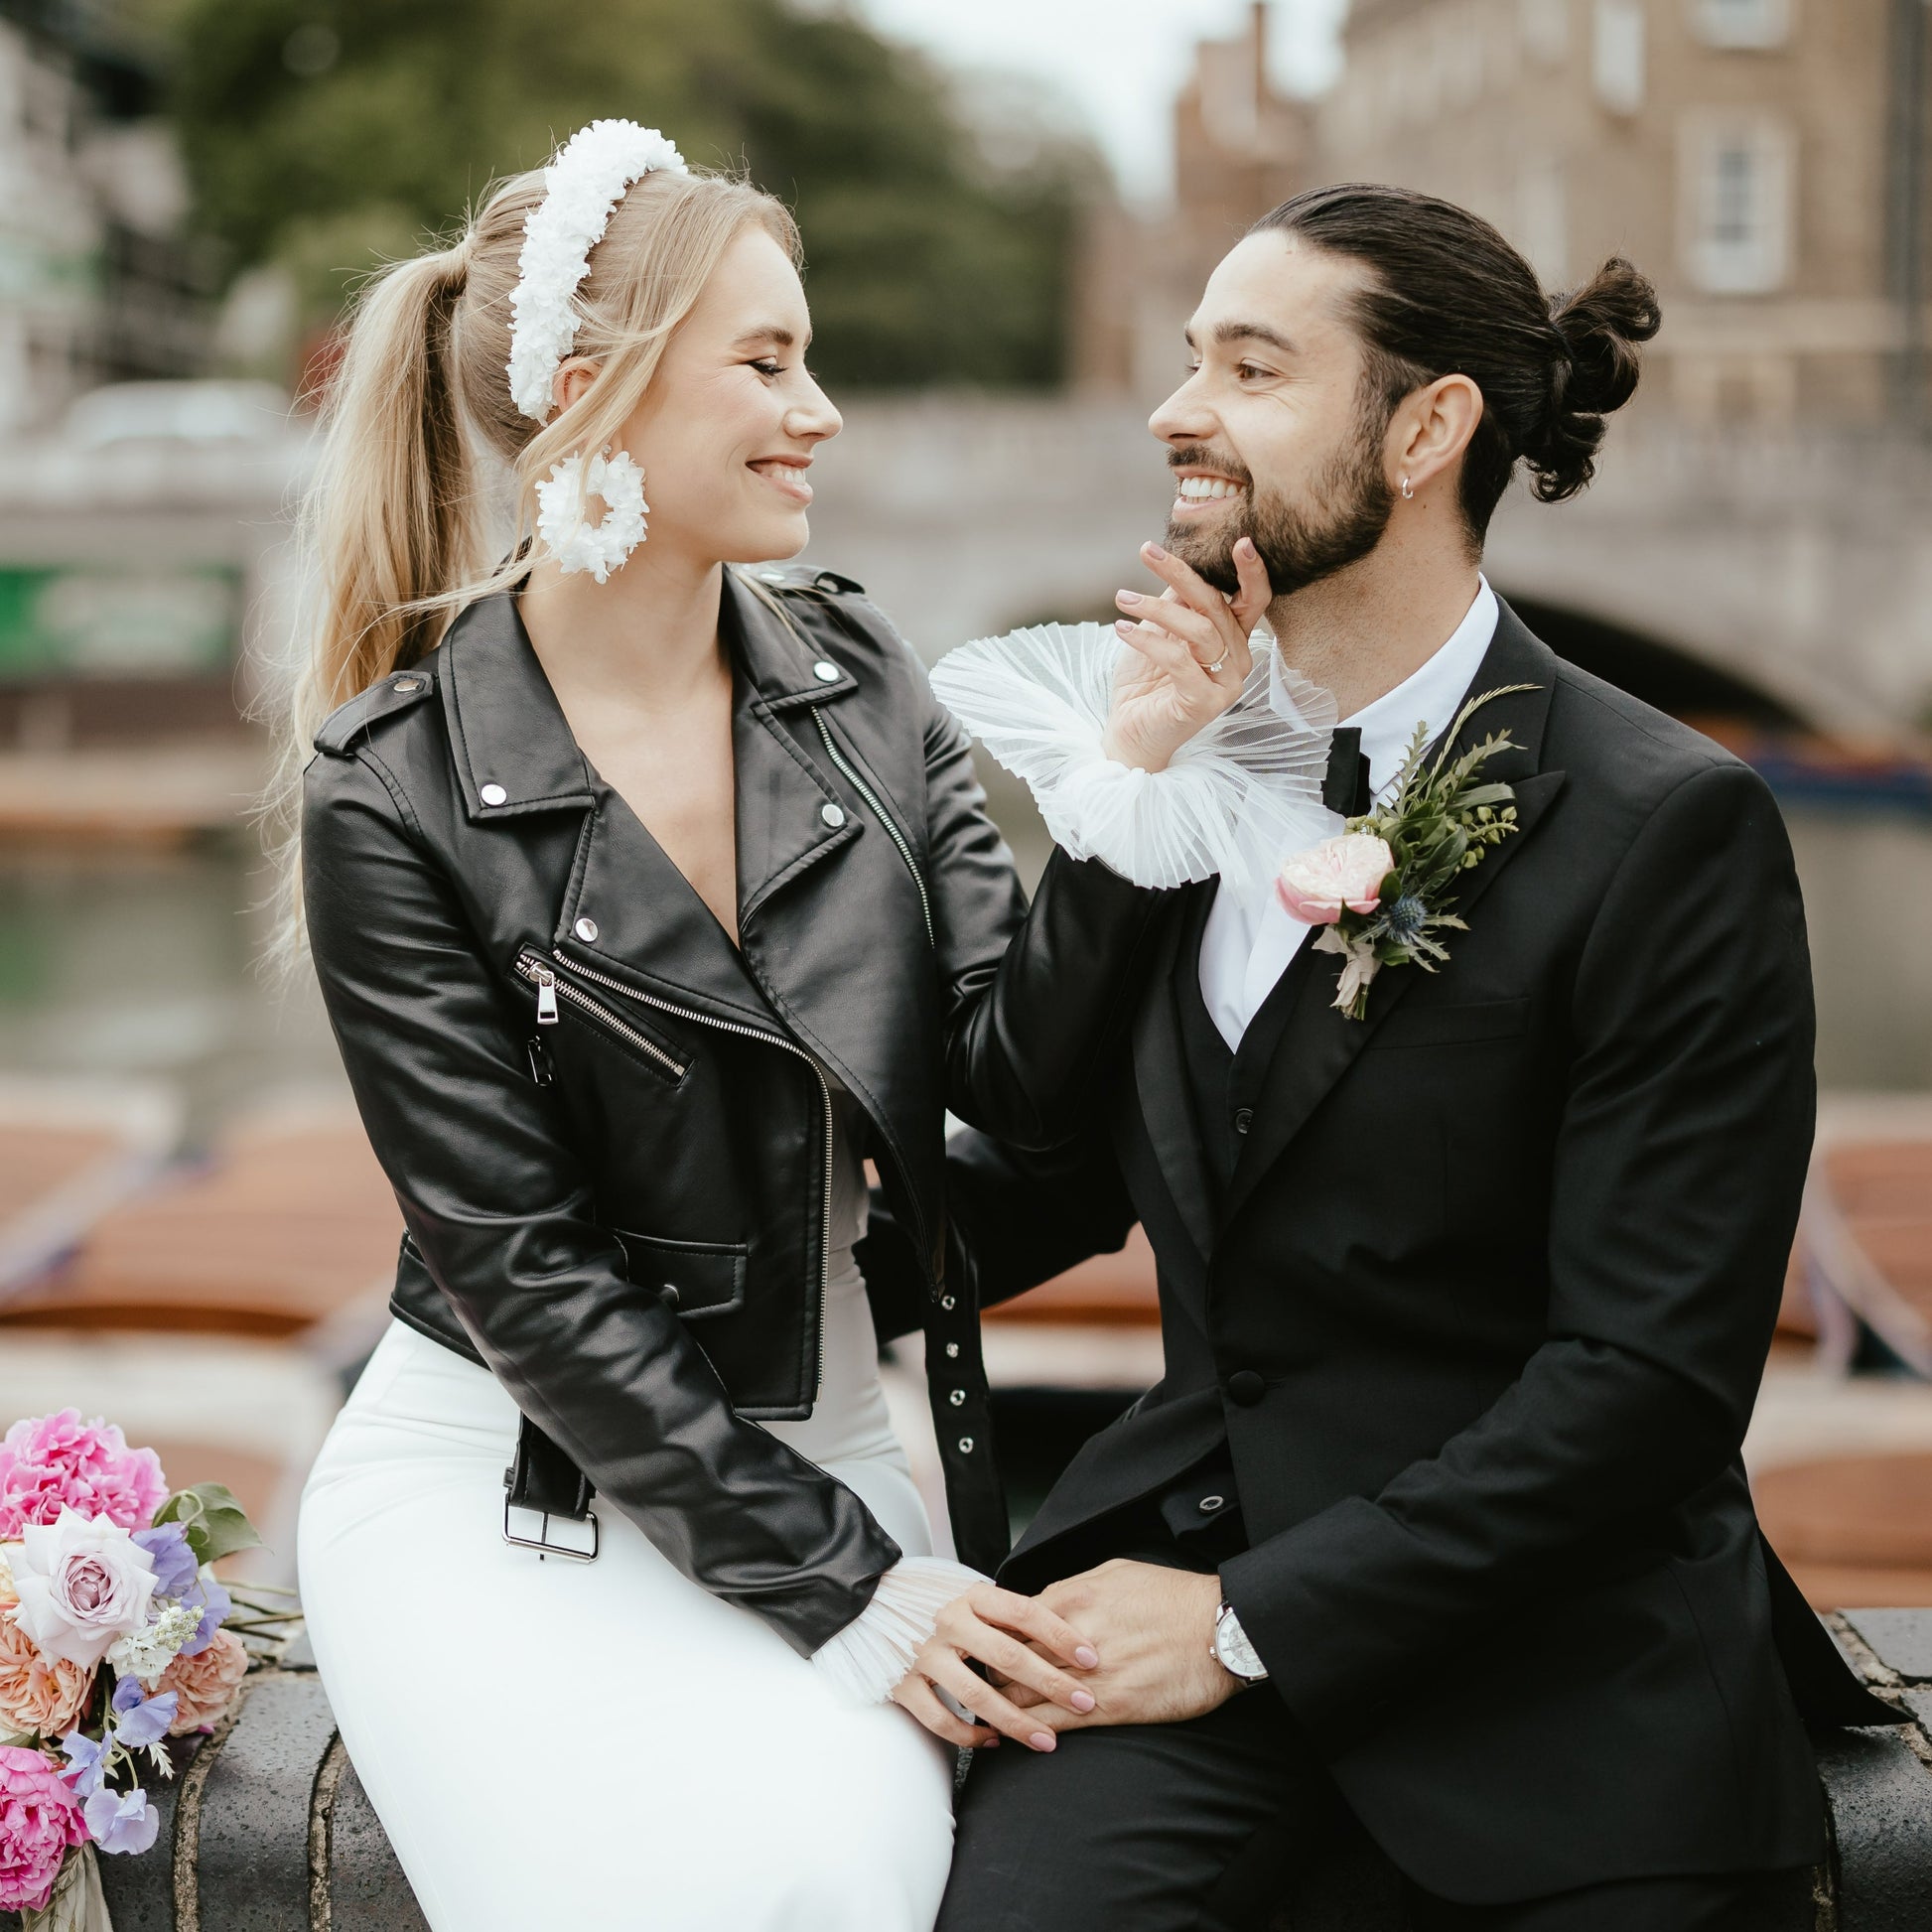 Gothic celestial wedding leather jacket for brides – Till Death embroidery adds a unique touch to this custom cover-up, perfect for a memorable and edgy wedding look